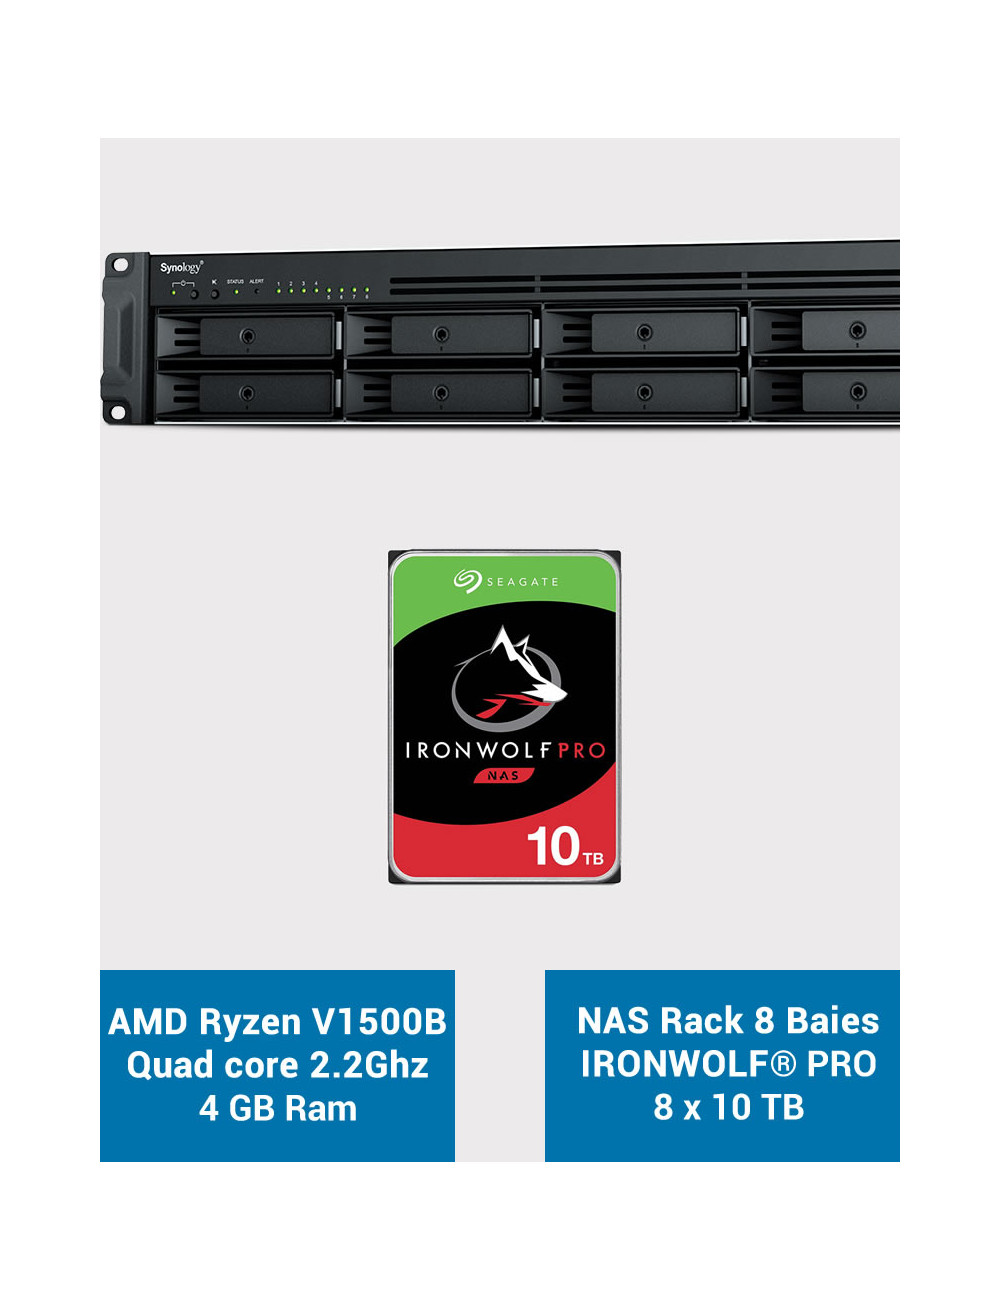 Synology RS1221+ Serveur NAS Rack IRONWOLF PRO 80To (8x10To)